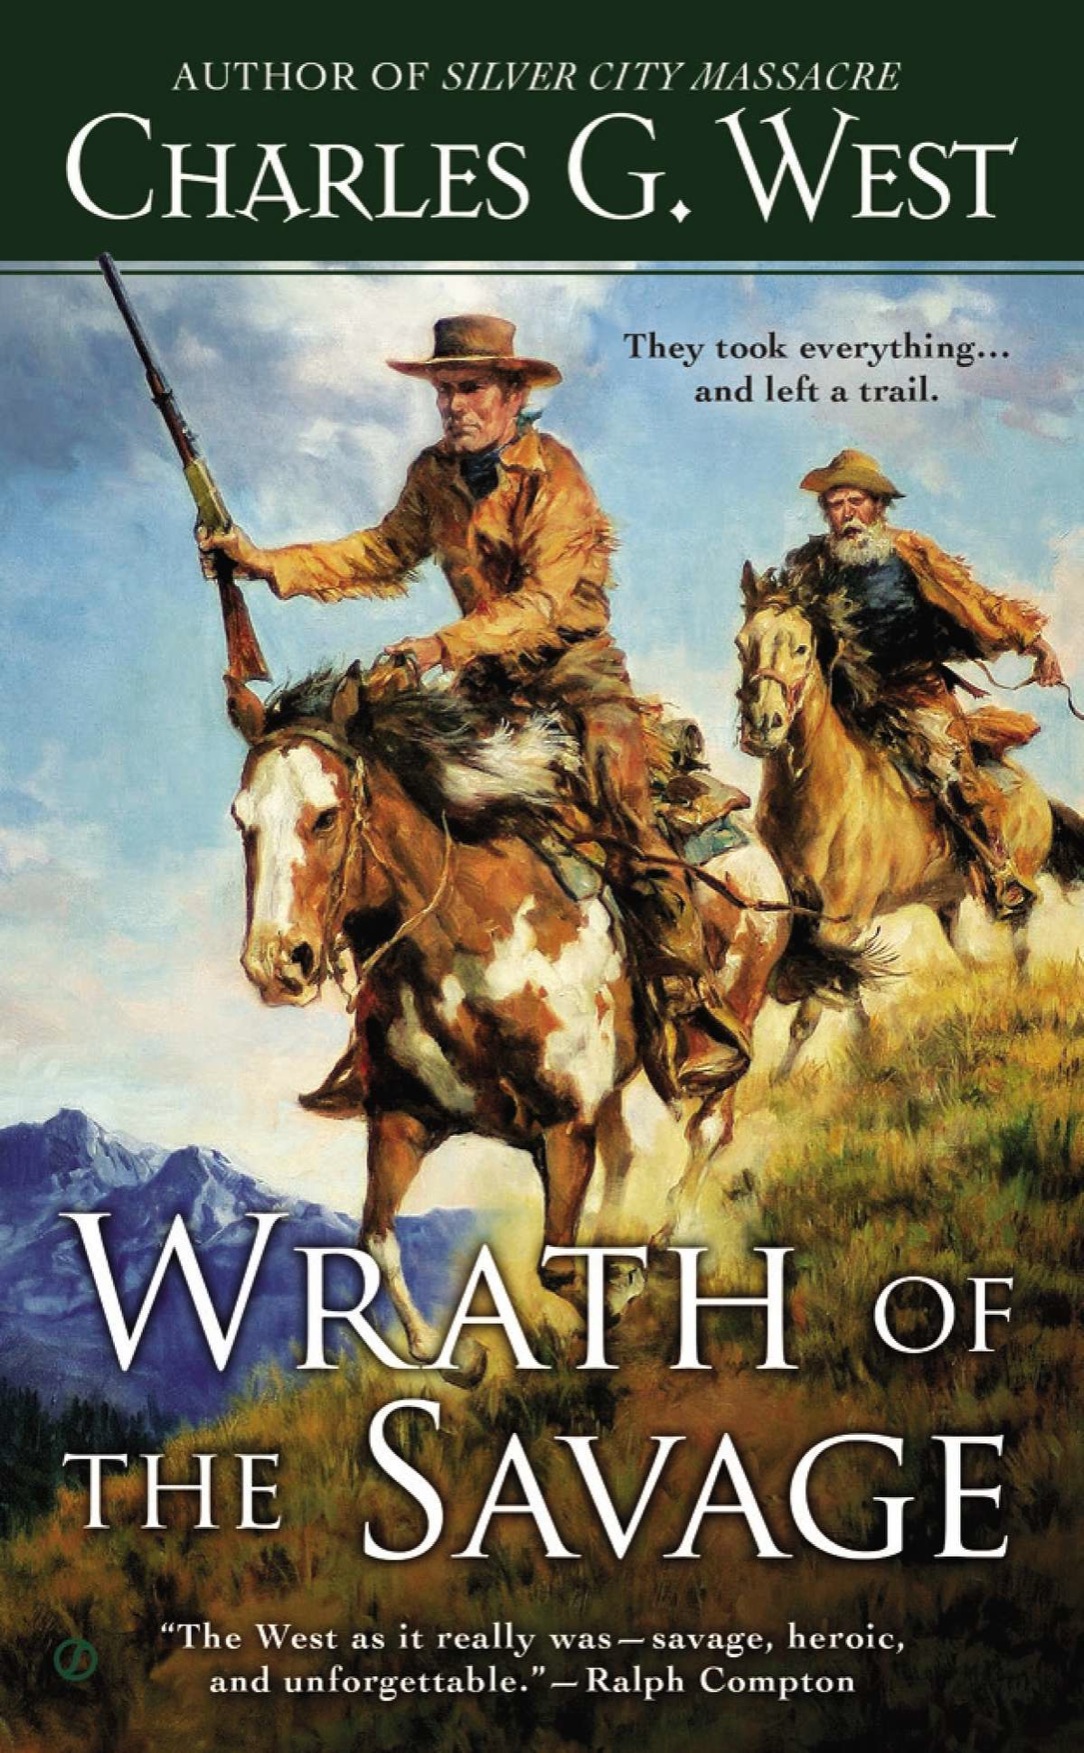 Wrath of the Savage (2014) by Charles G. West